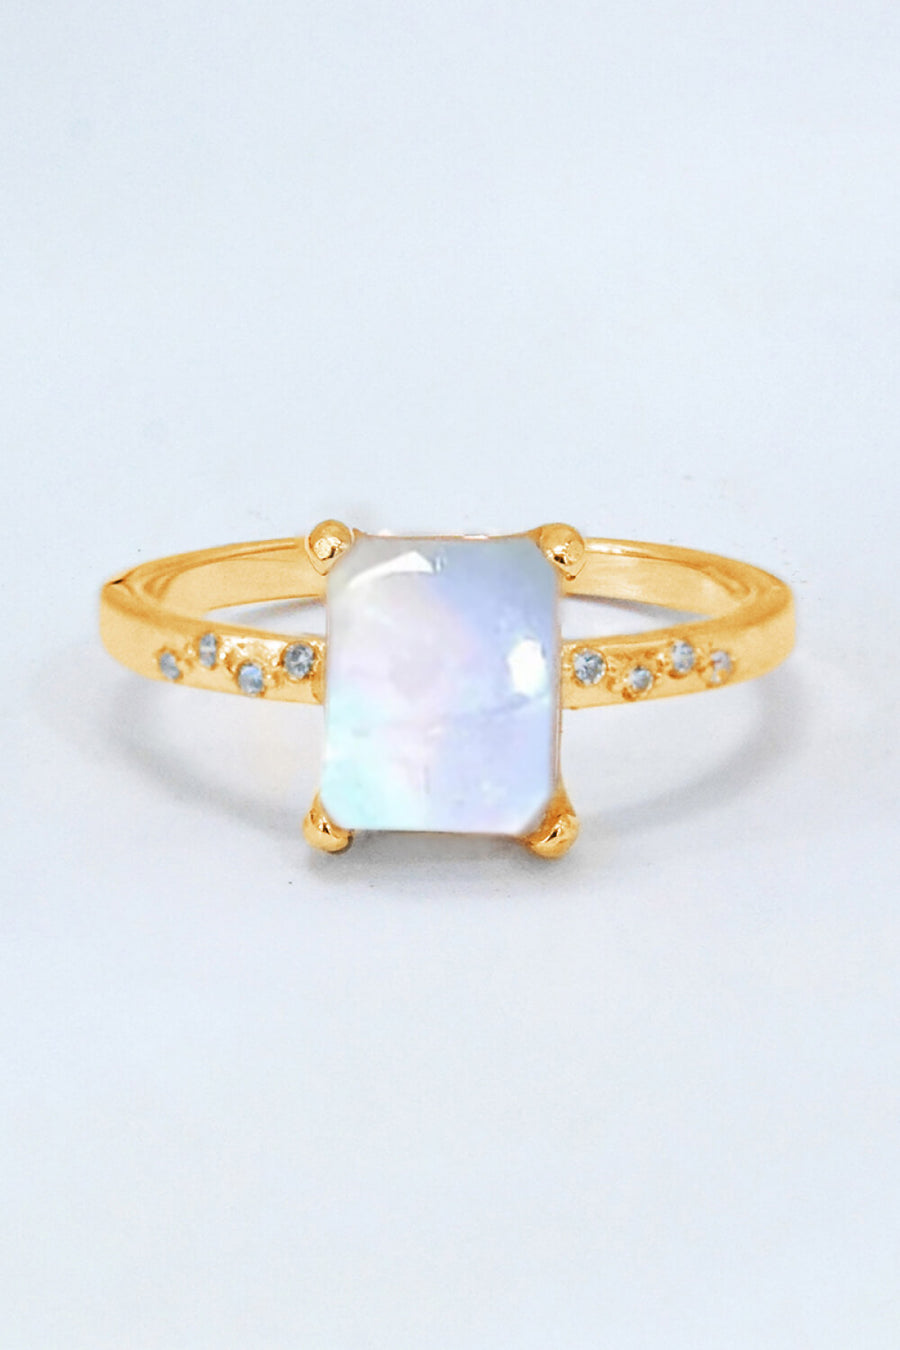 Perfect Fit Moonstone Ring